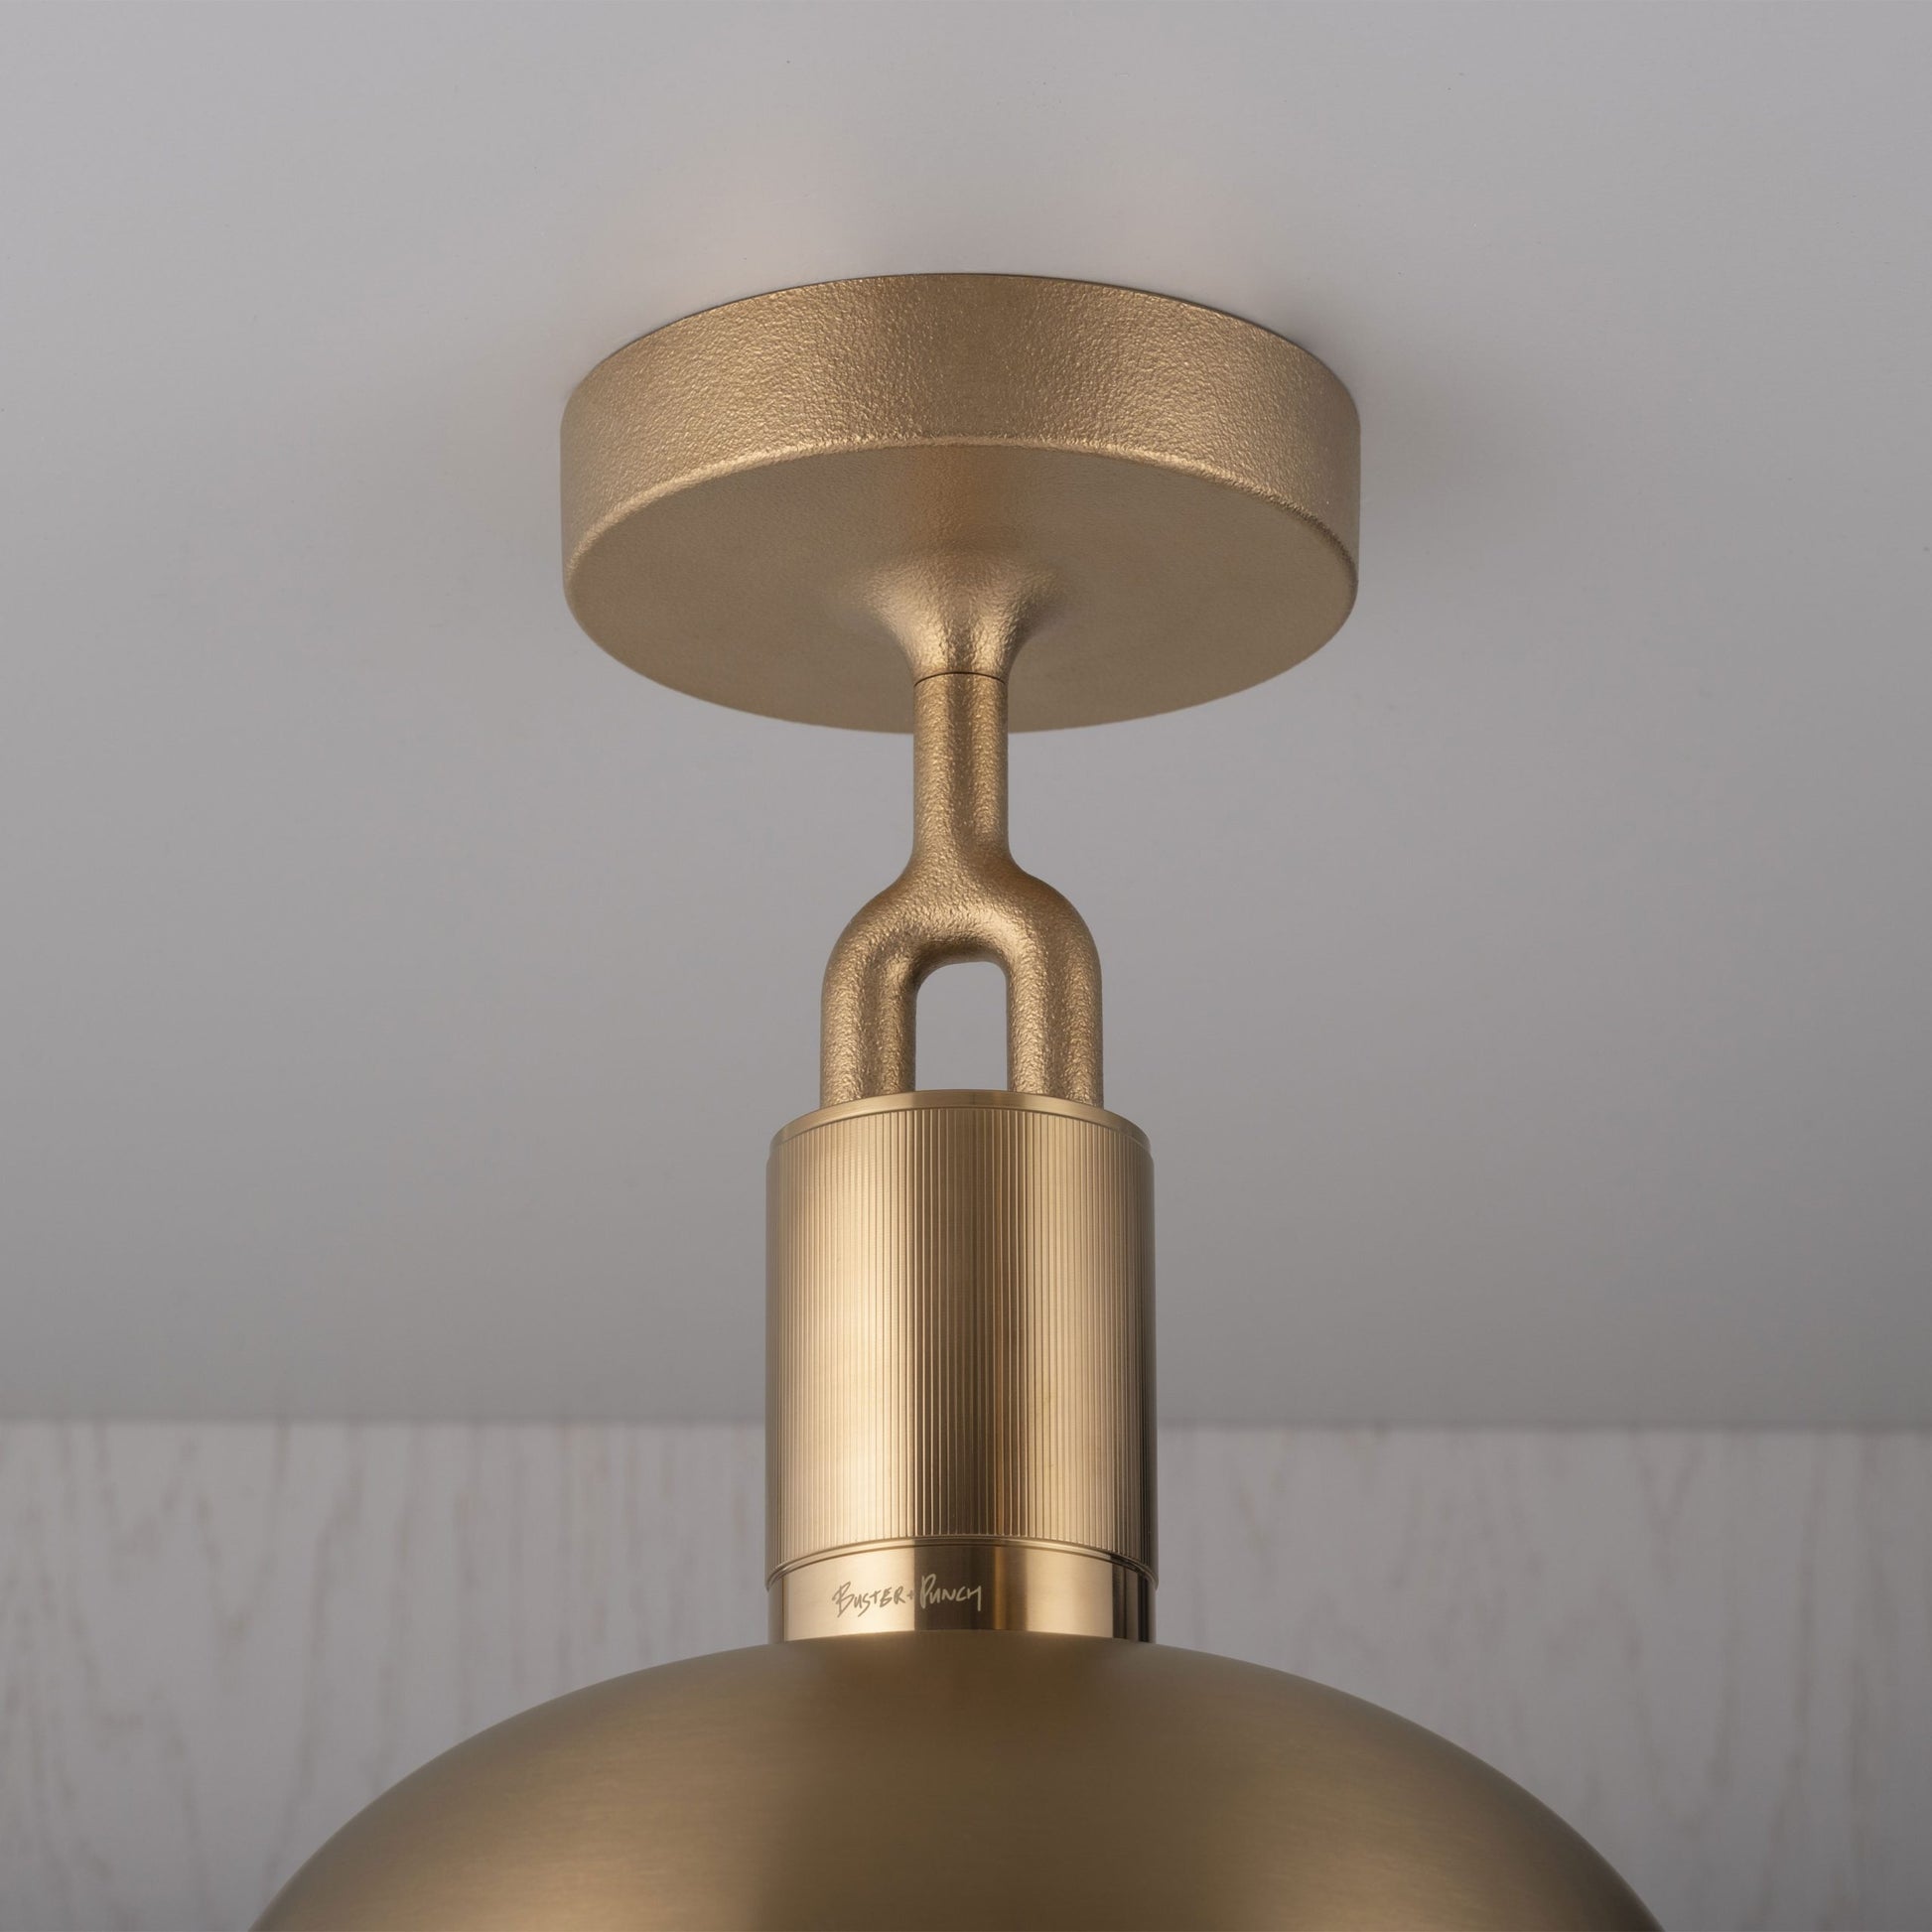 Forked Ceiling Light / Shade / Globe / Opal / Large Brass, detailed close up view of fork and fitting.